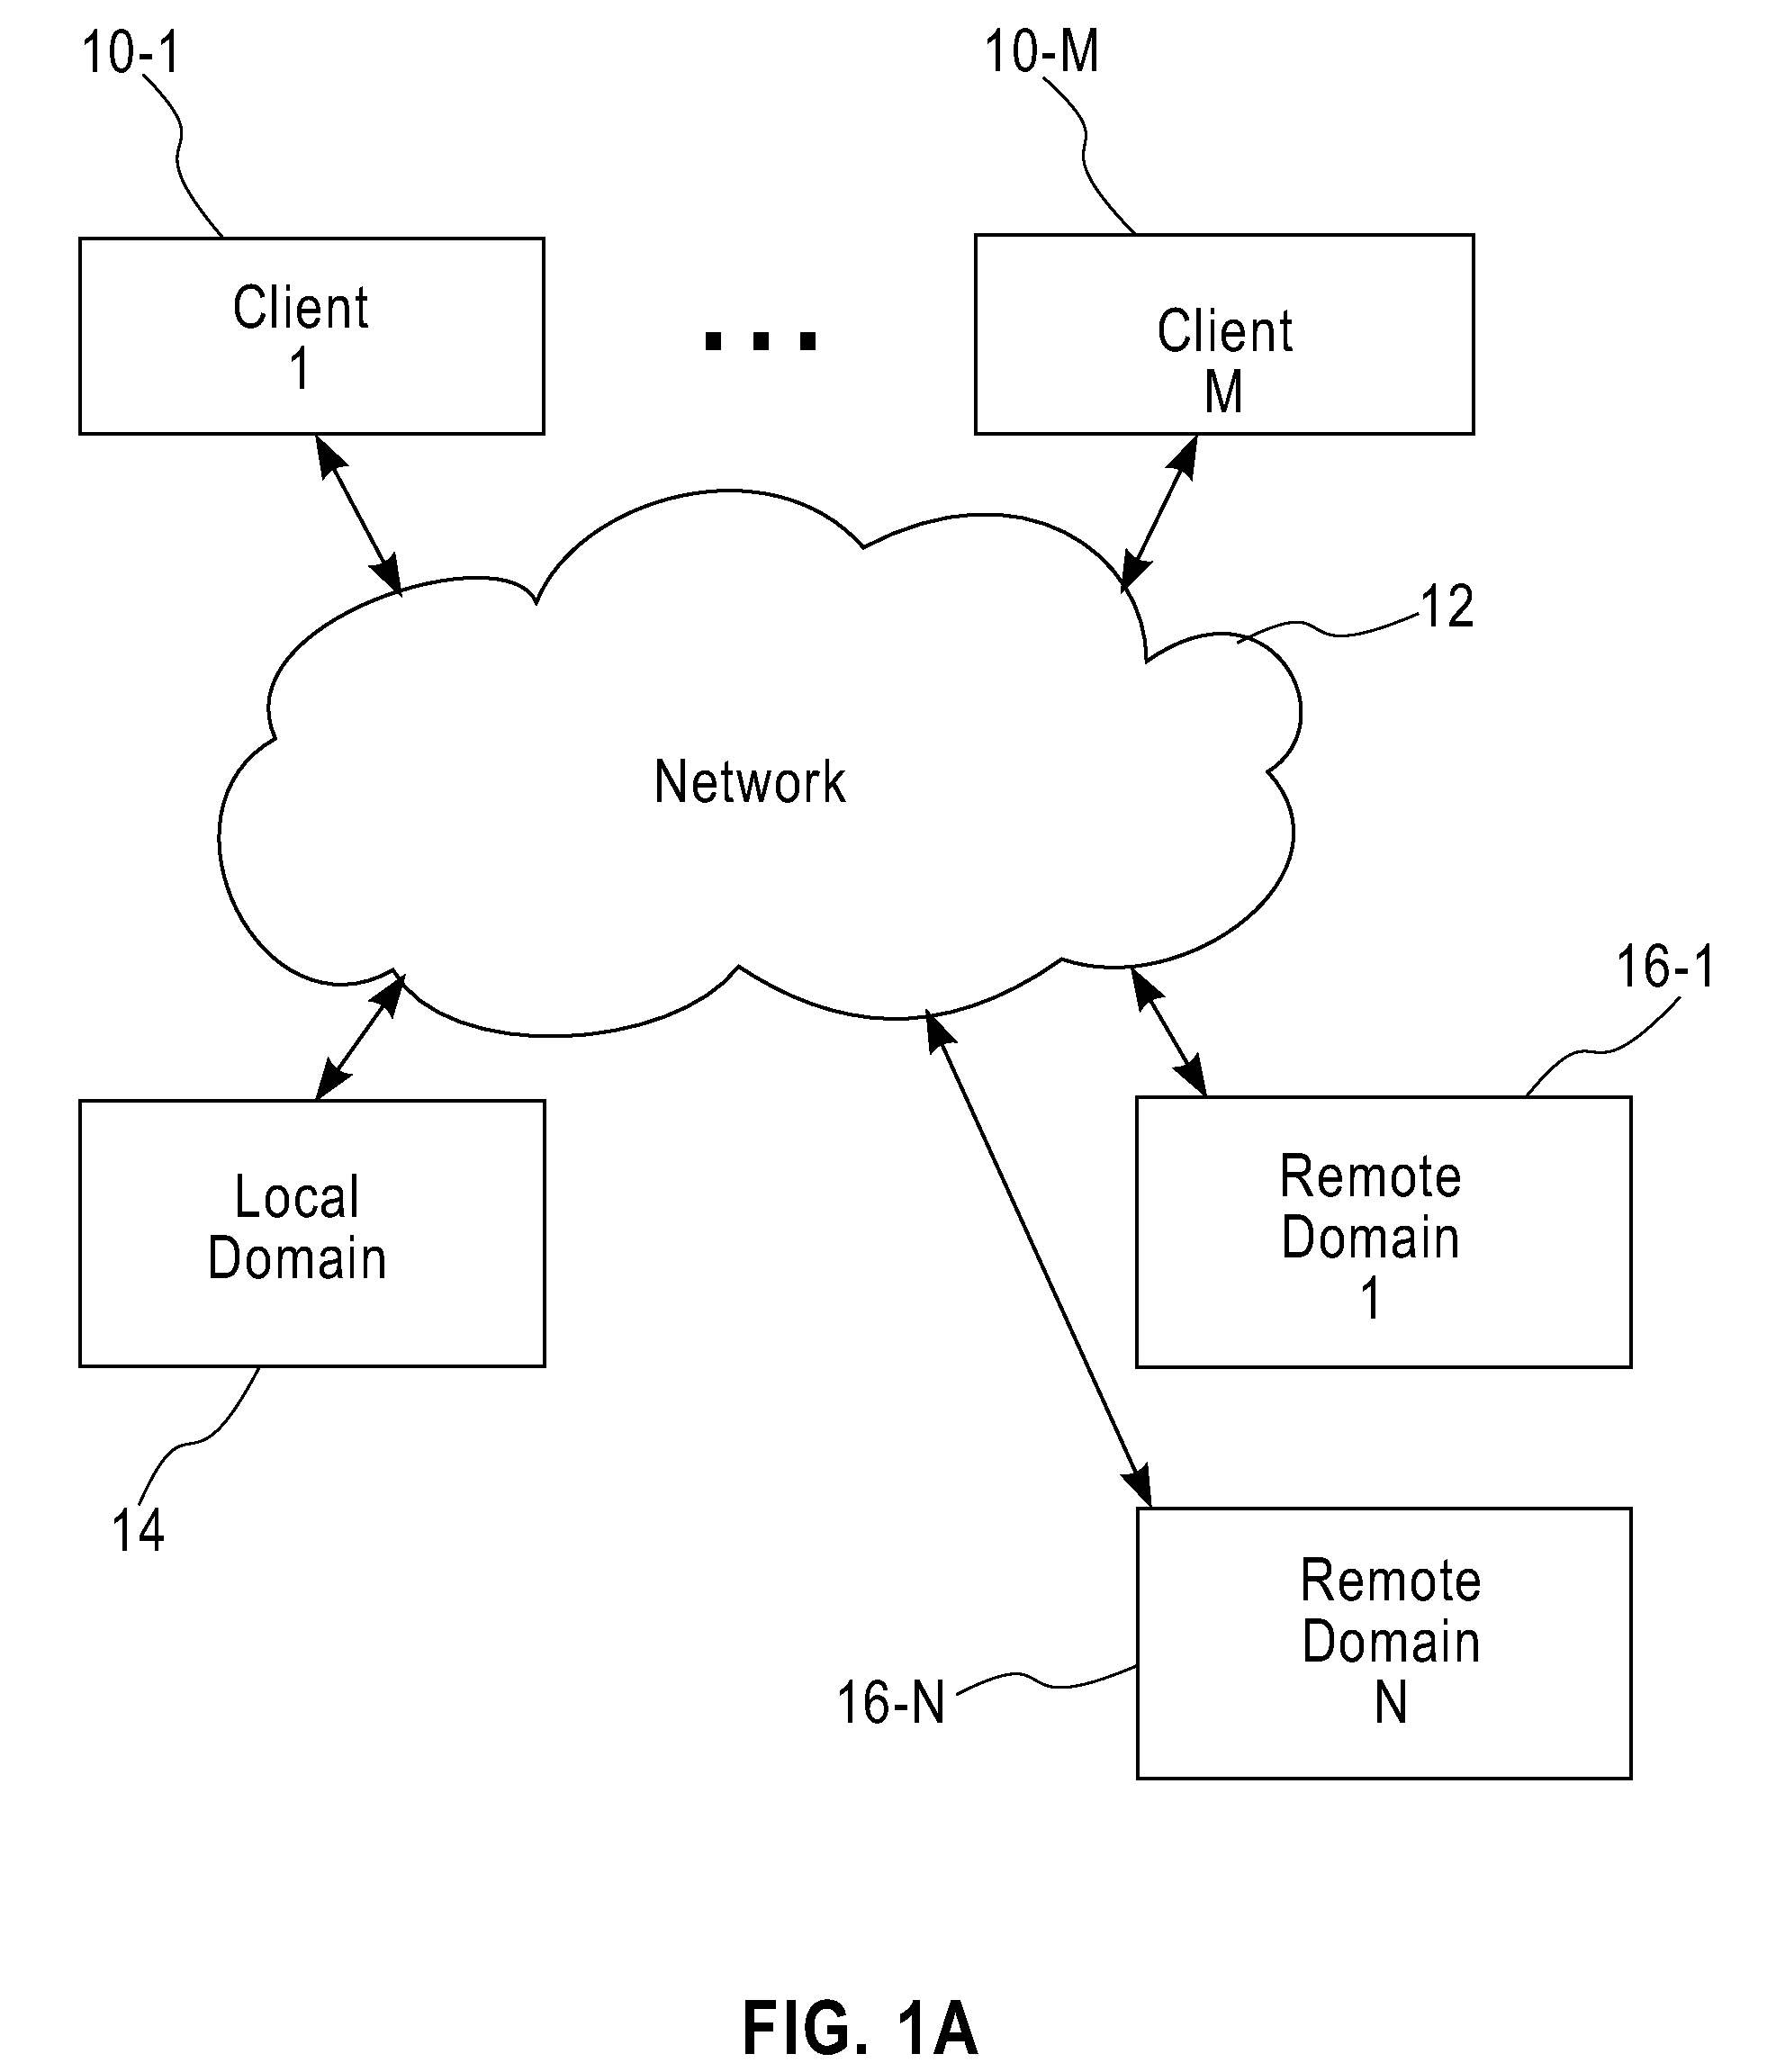 Method and apparatus for network distribution and provisioning of applications across multiple domains